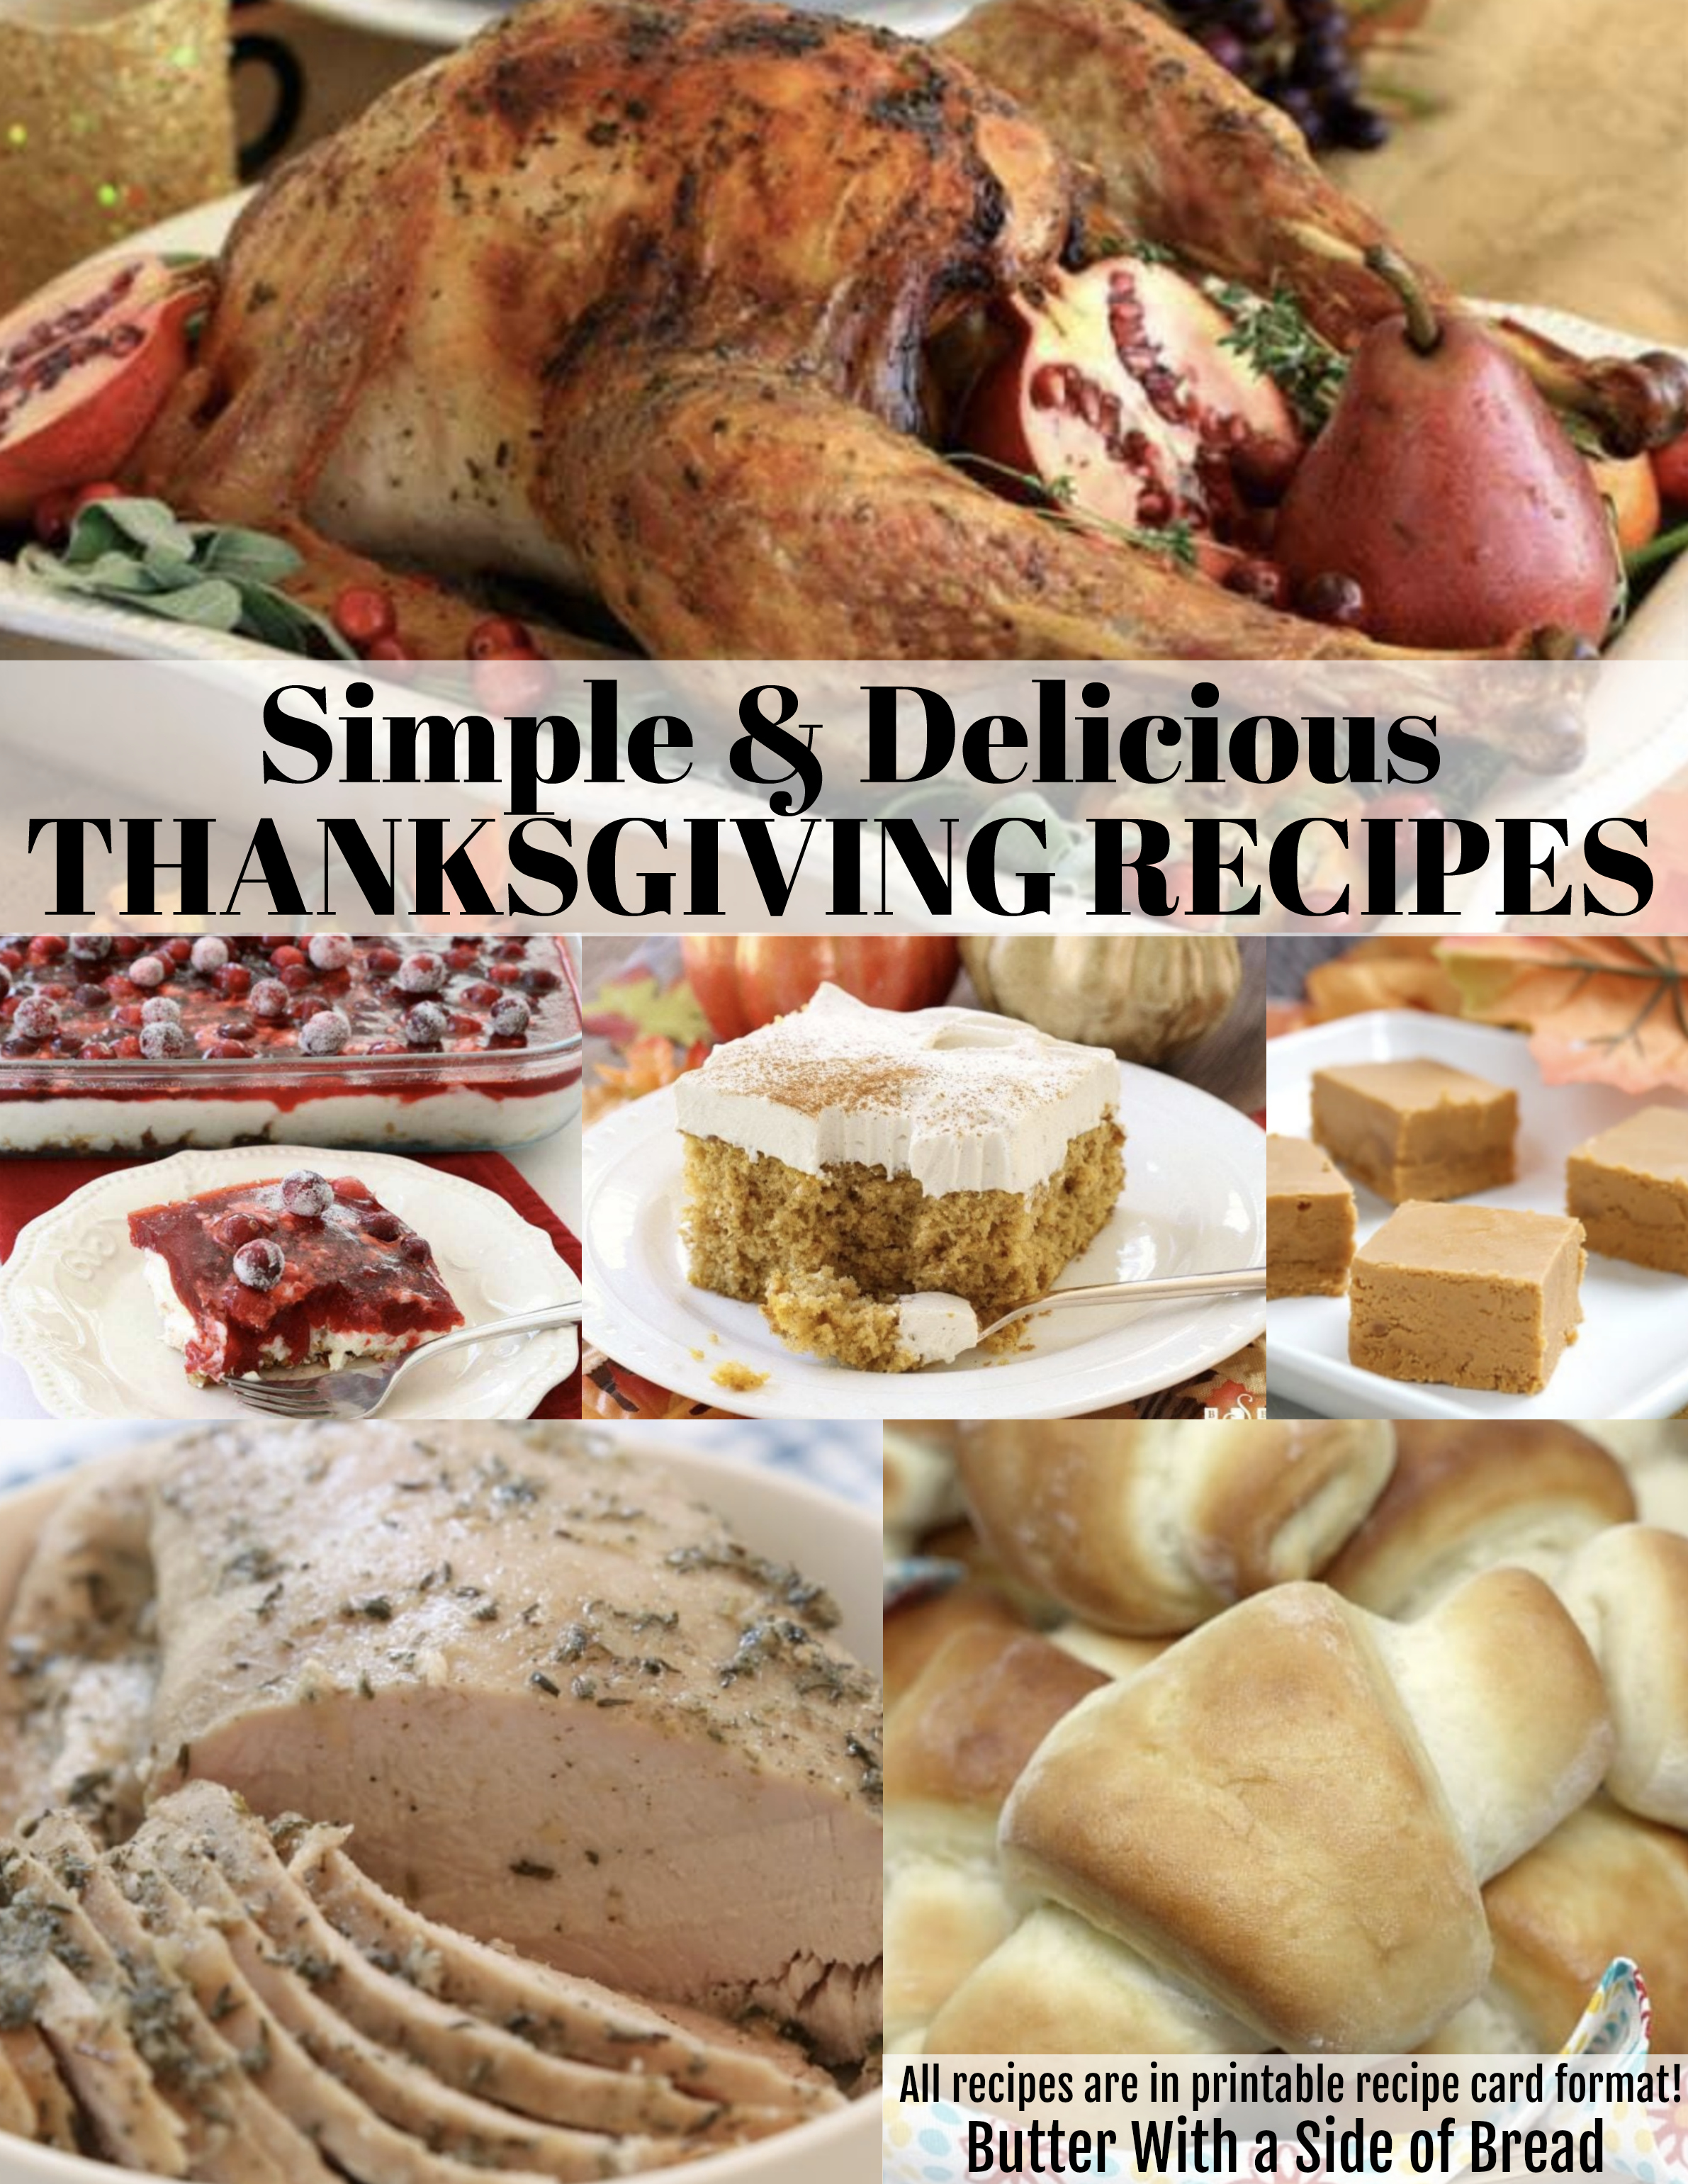 CLASSIC THANKSGIVING DINNER & DESSERT RECIPES~ THE COMPLETE MEAL!